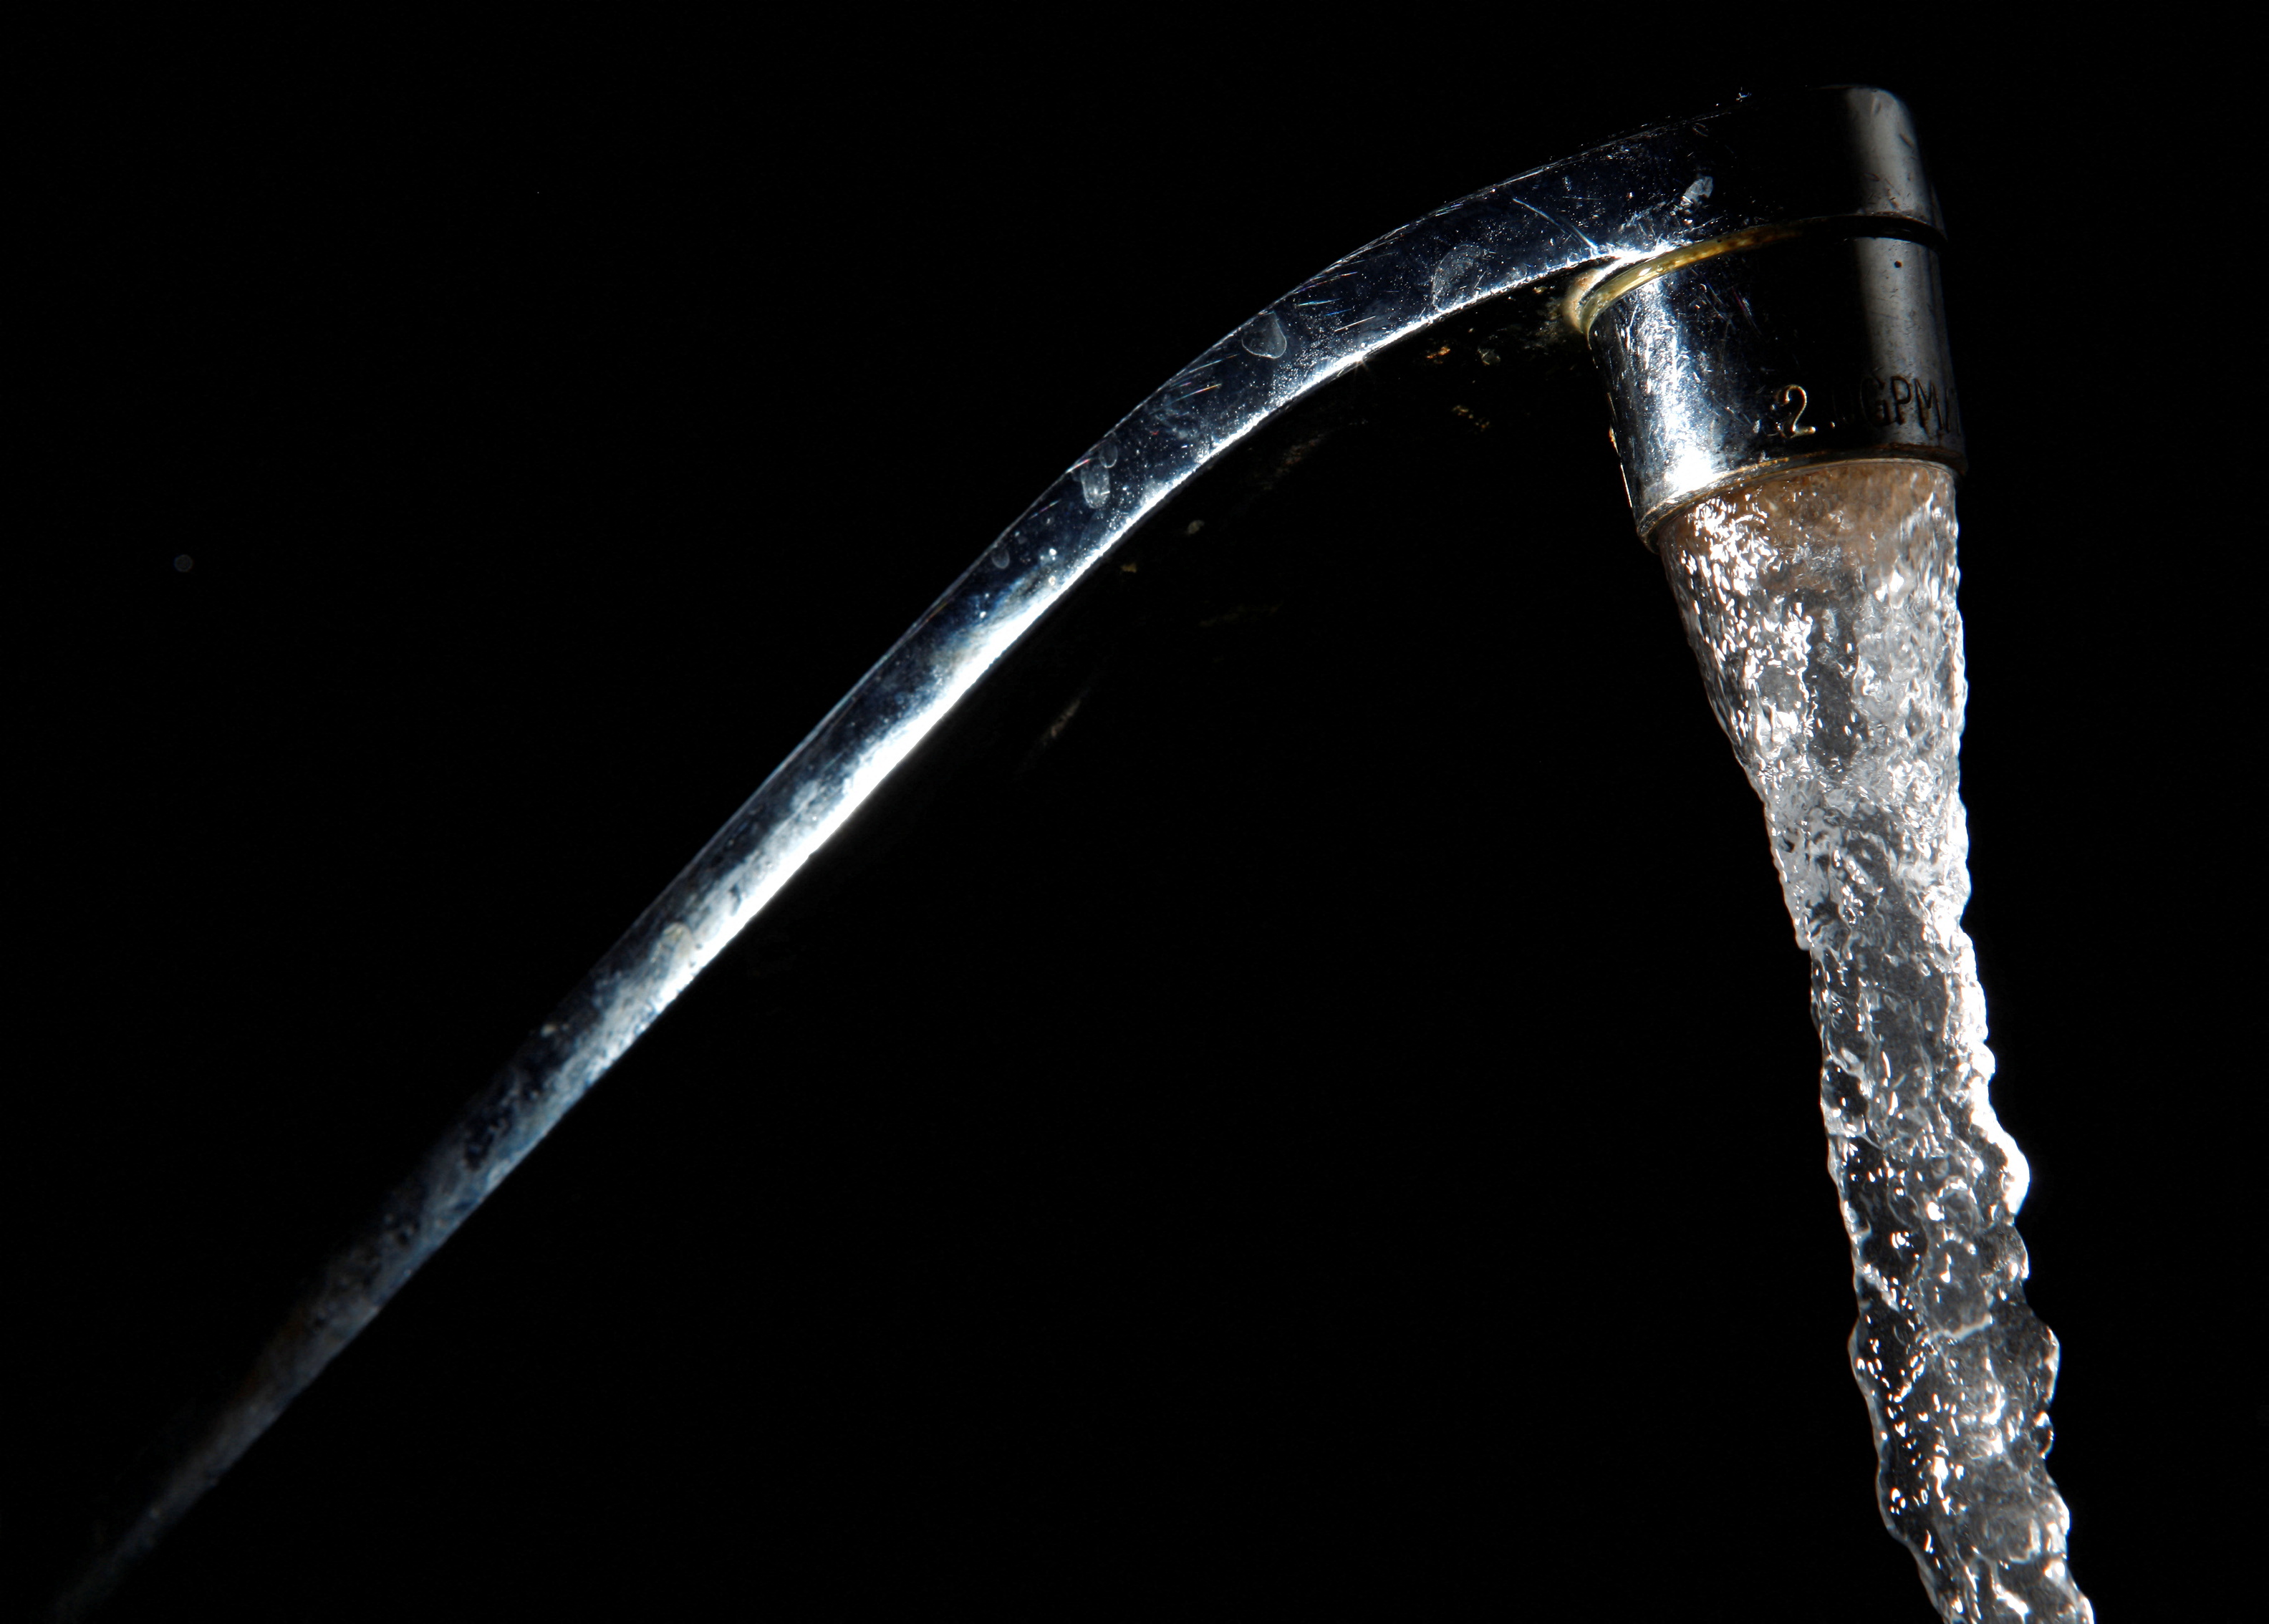 Tap water comes out of a faucet in New York, June 14, 2009.  REUTERS/Eric Thayer